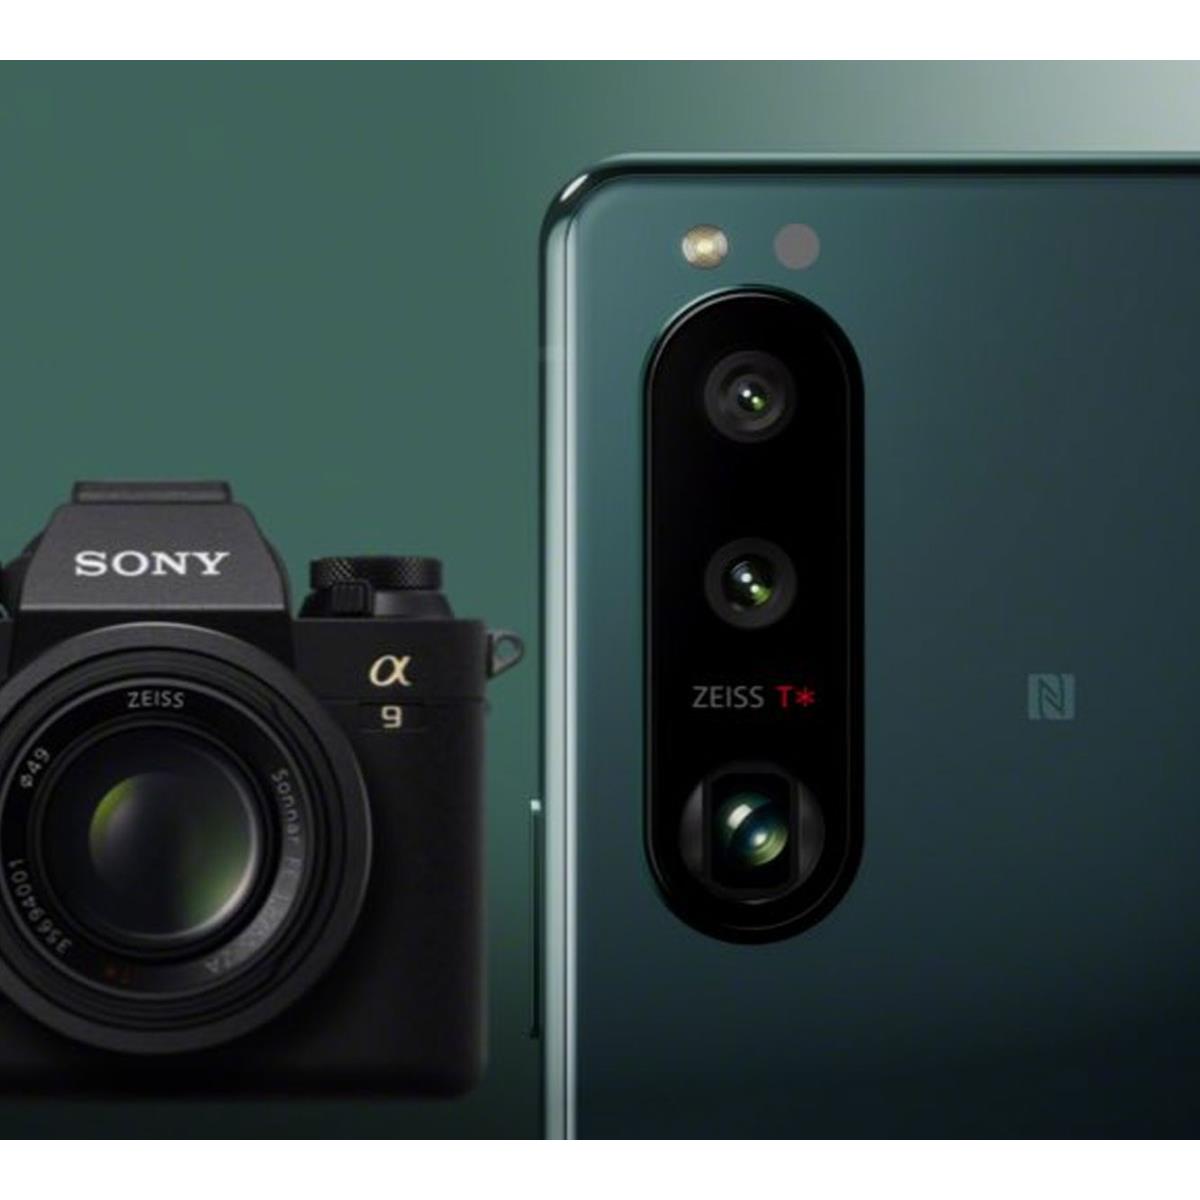 Sony predicts phones to soon overtake DSLR cameras — is that really likely?